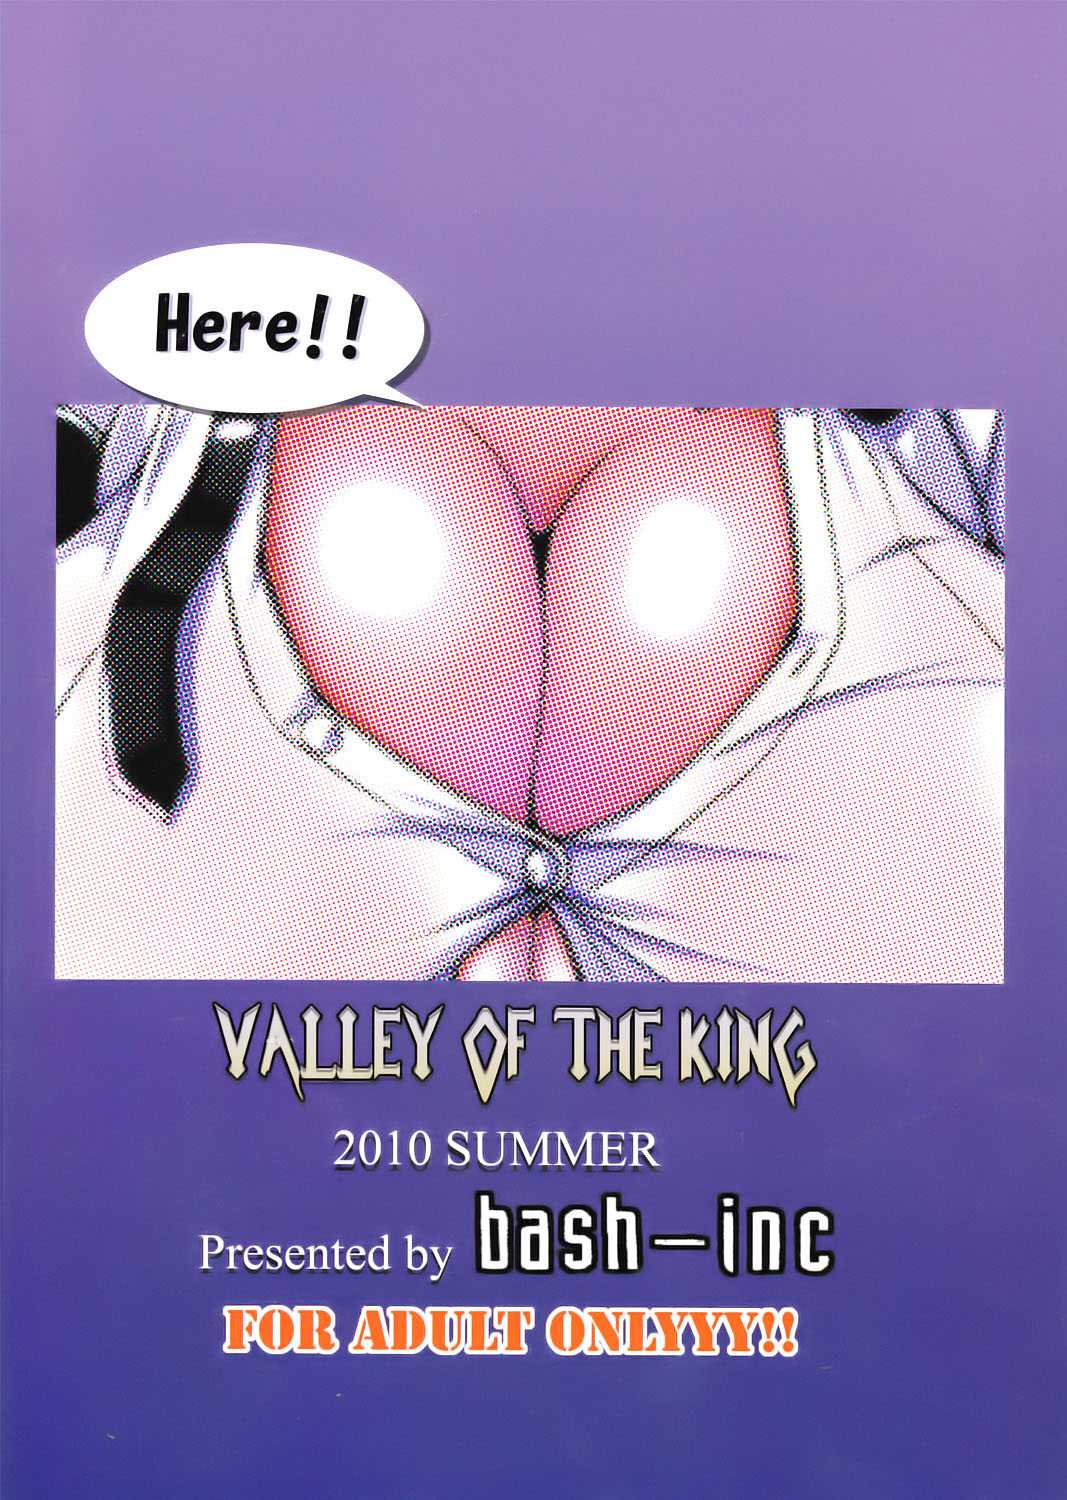 [bash-inc] VALLEY OF THE KING 